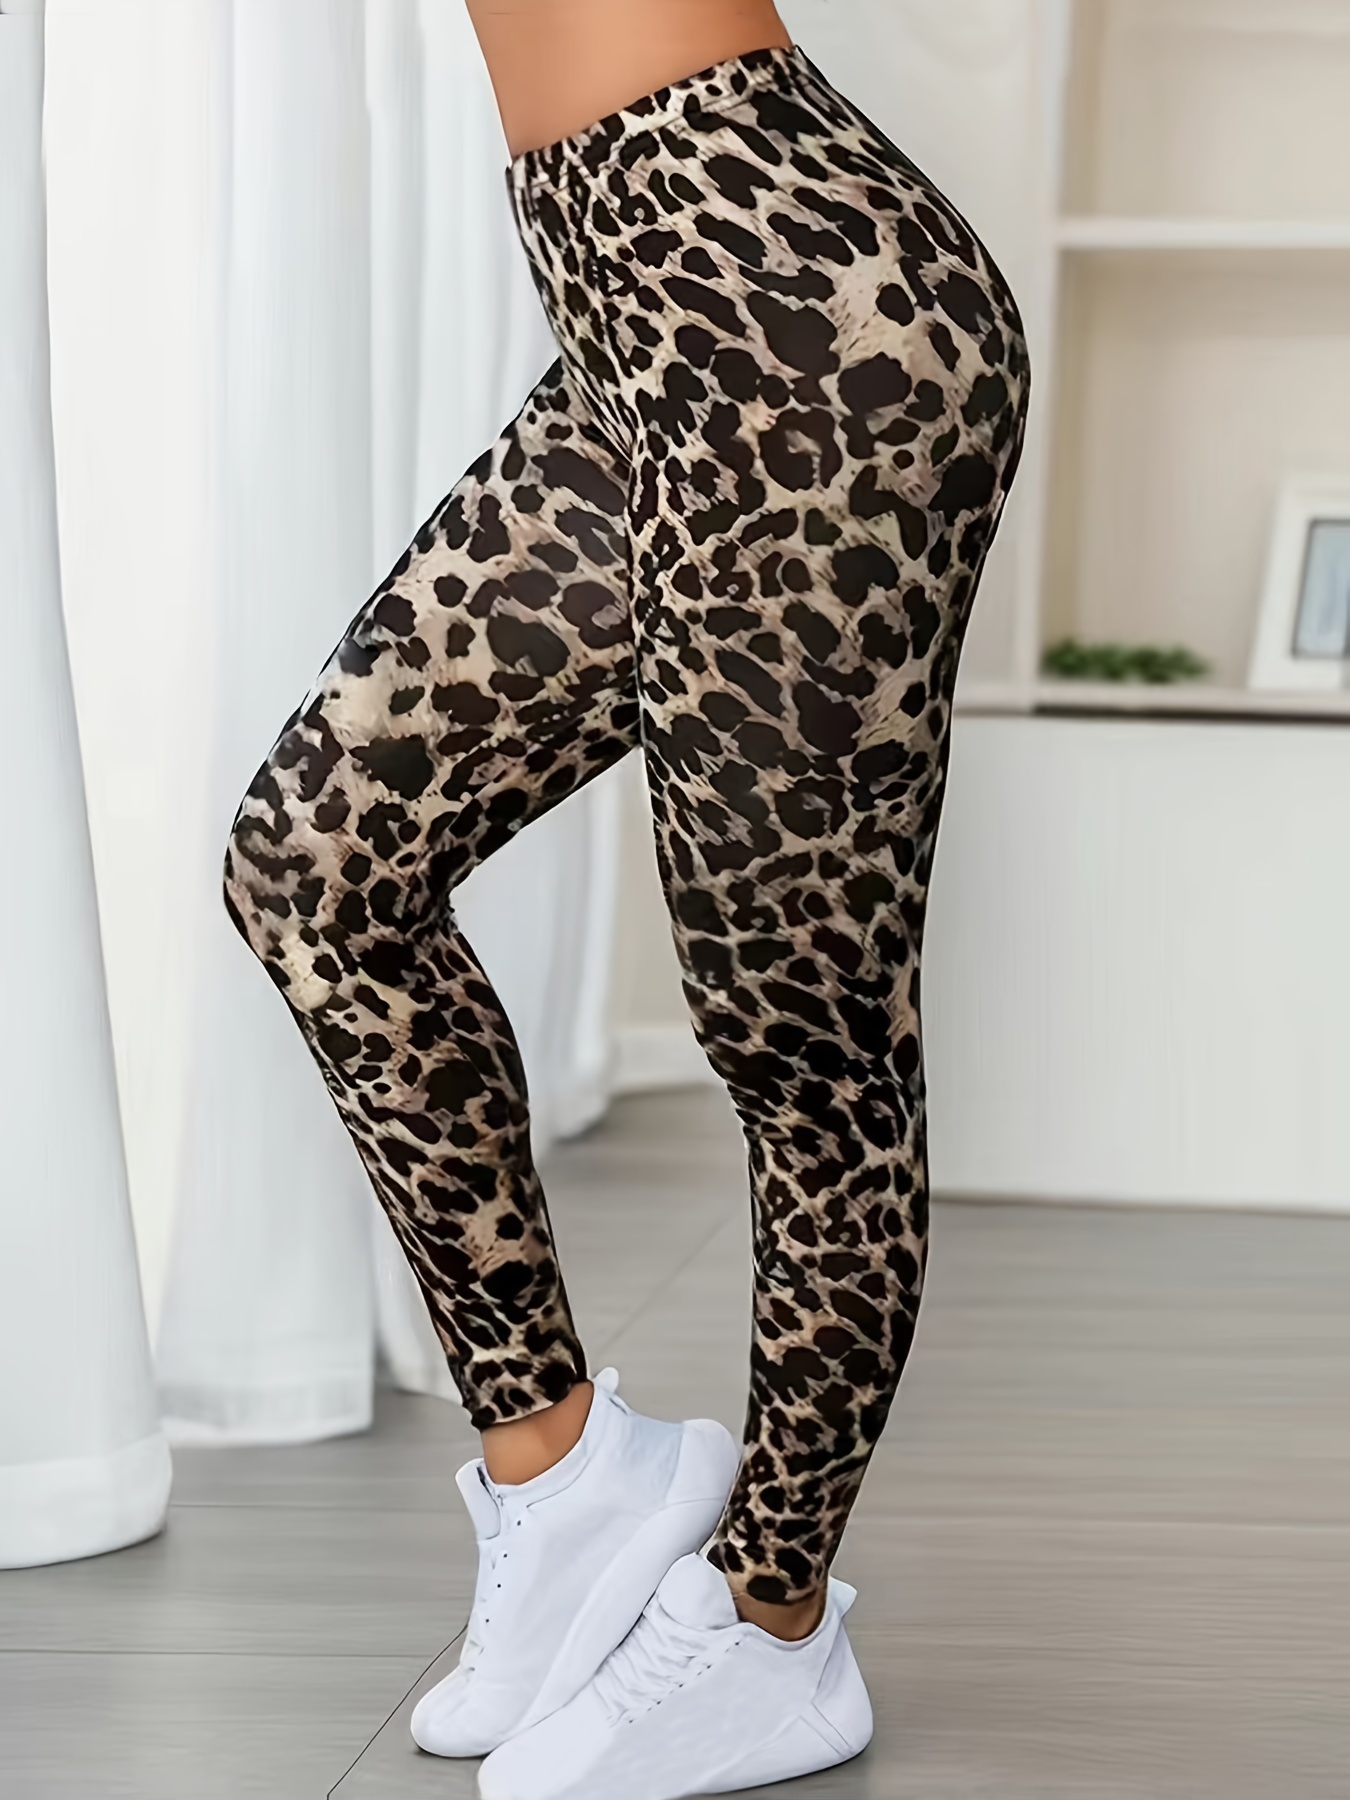 Cow Spotted Leggings for Women, Plus Size Workout Leggings